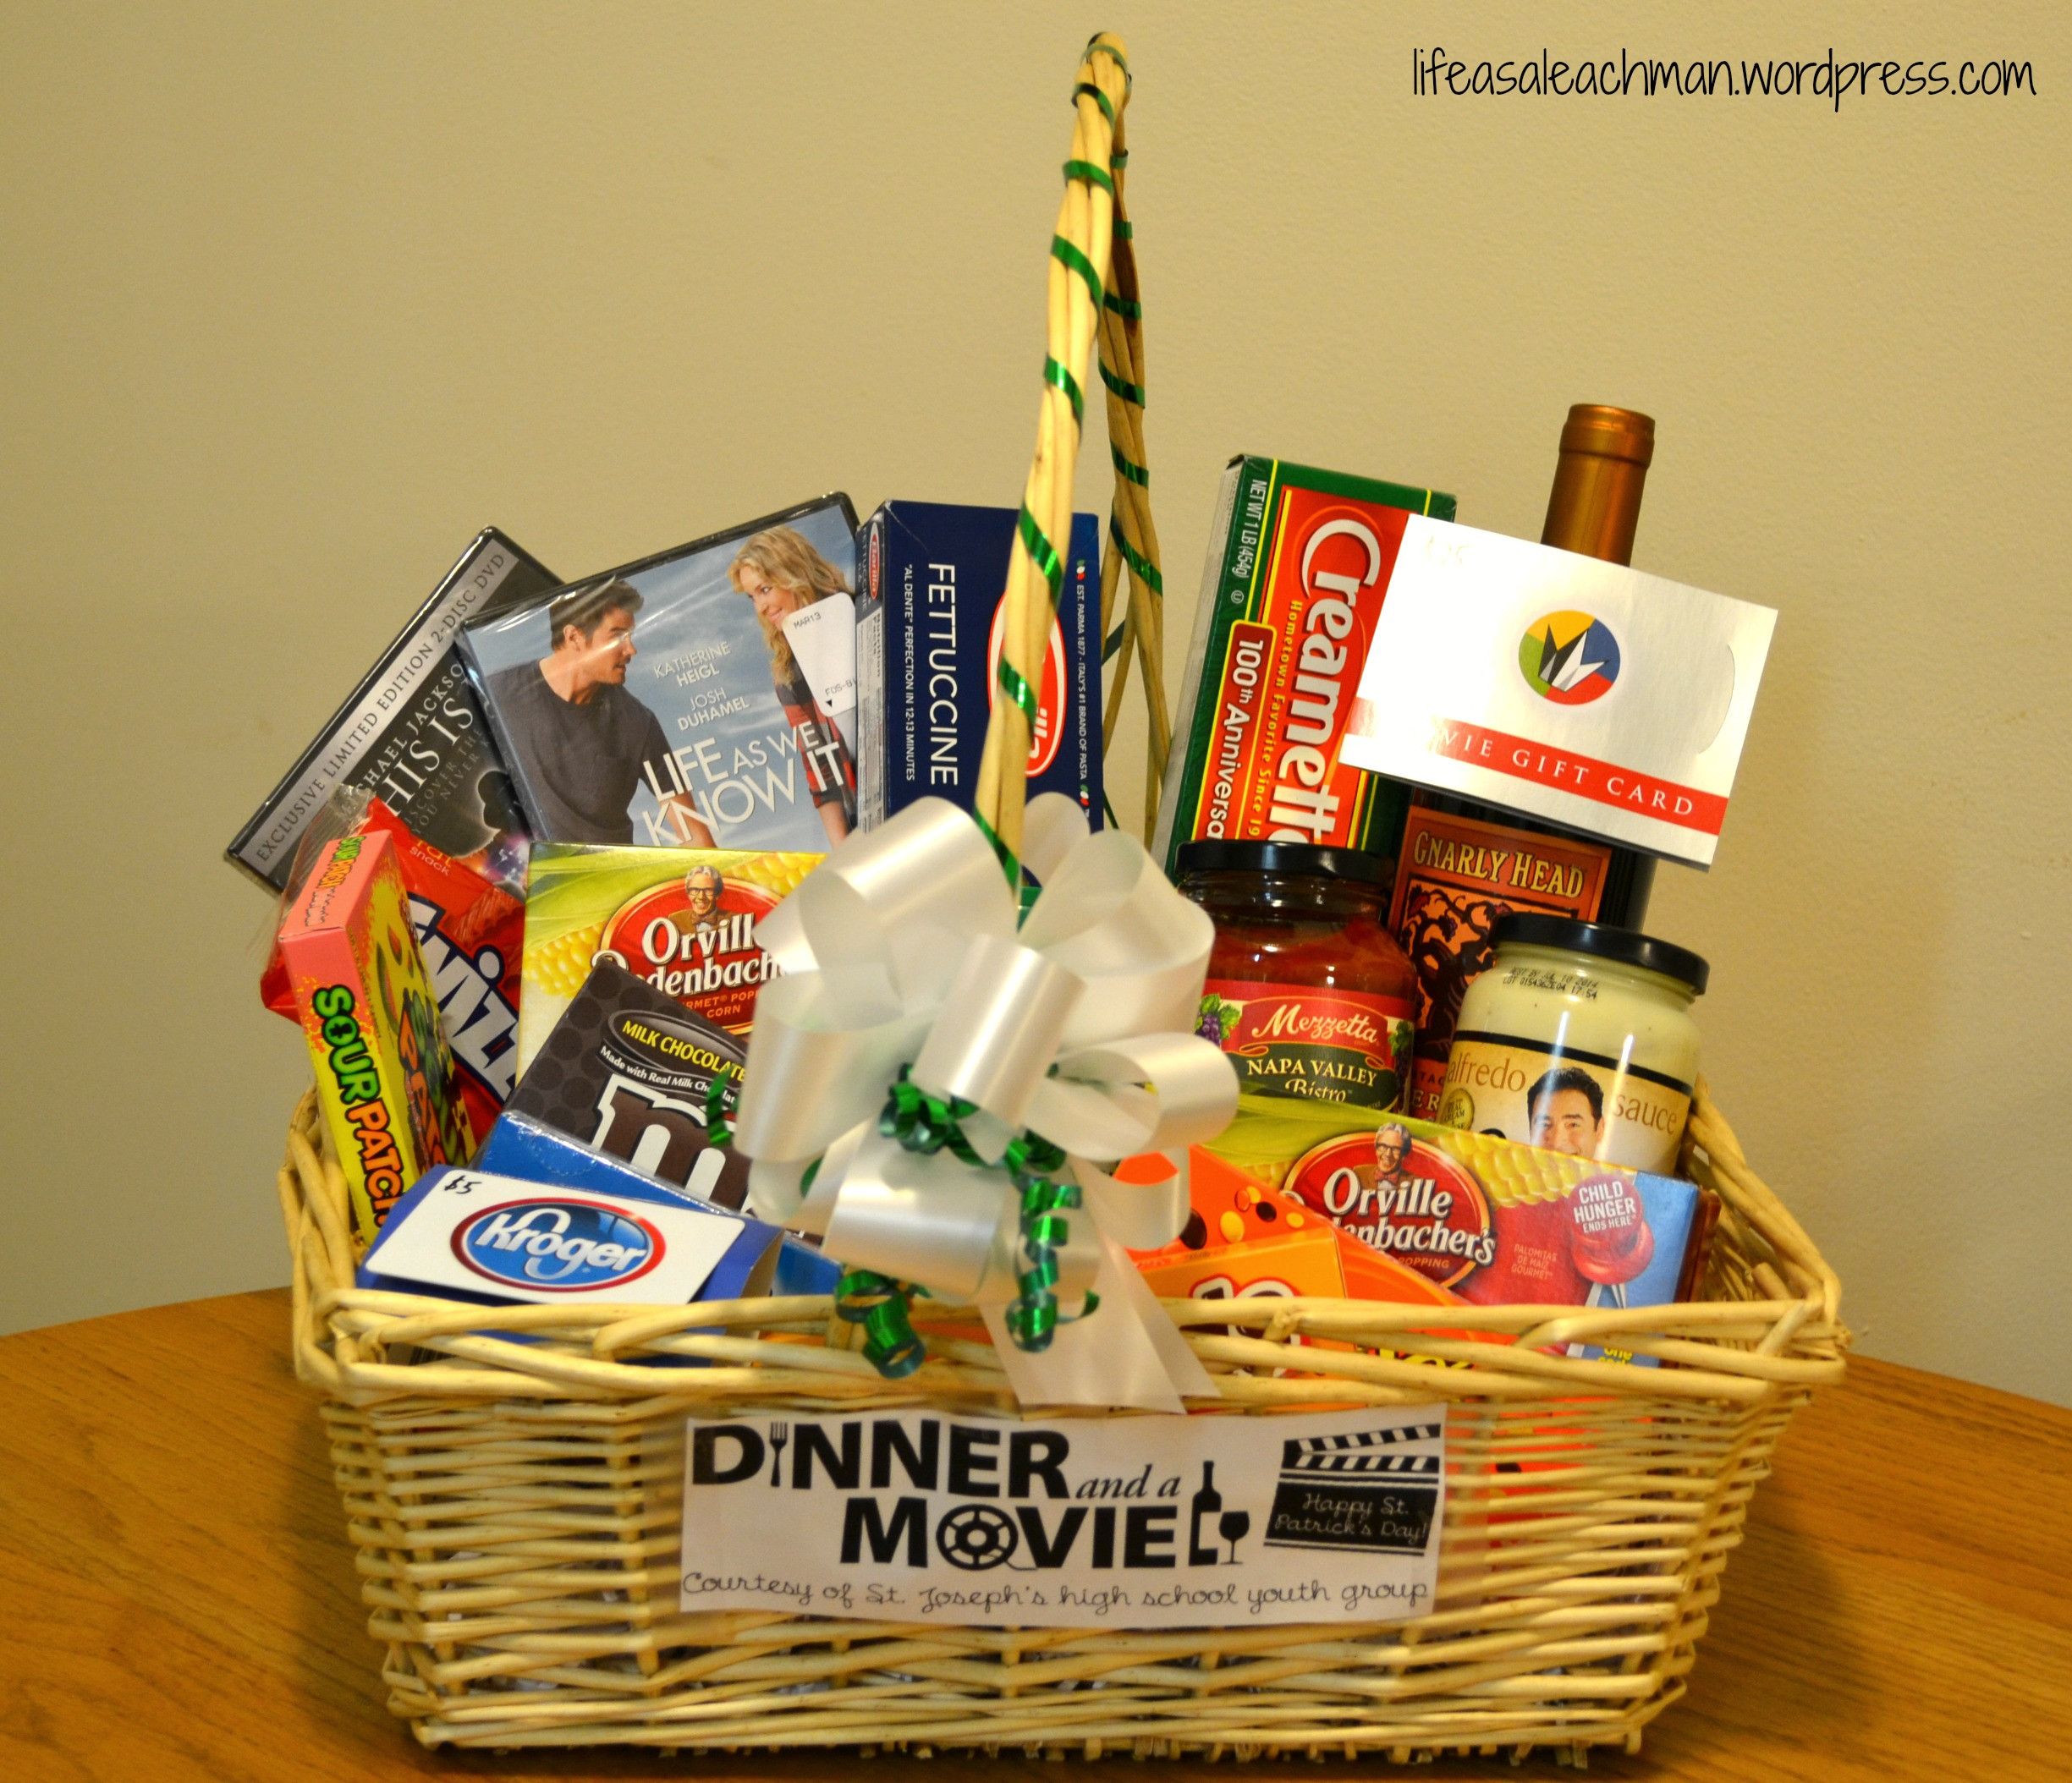 Movie Theatre Gift Basket Ideas
 Homemade Gifts